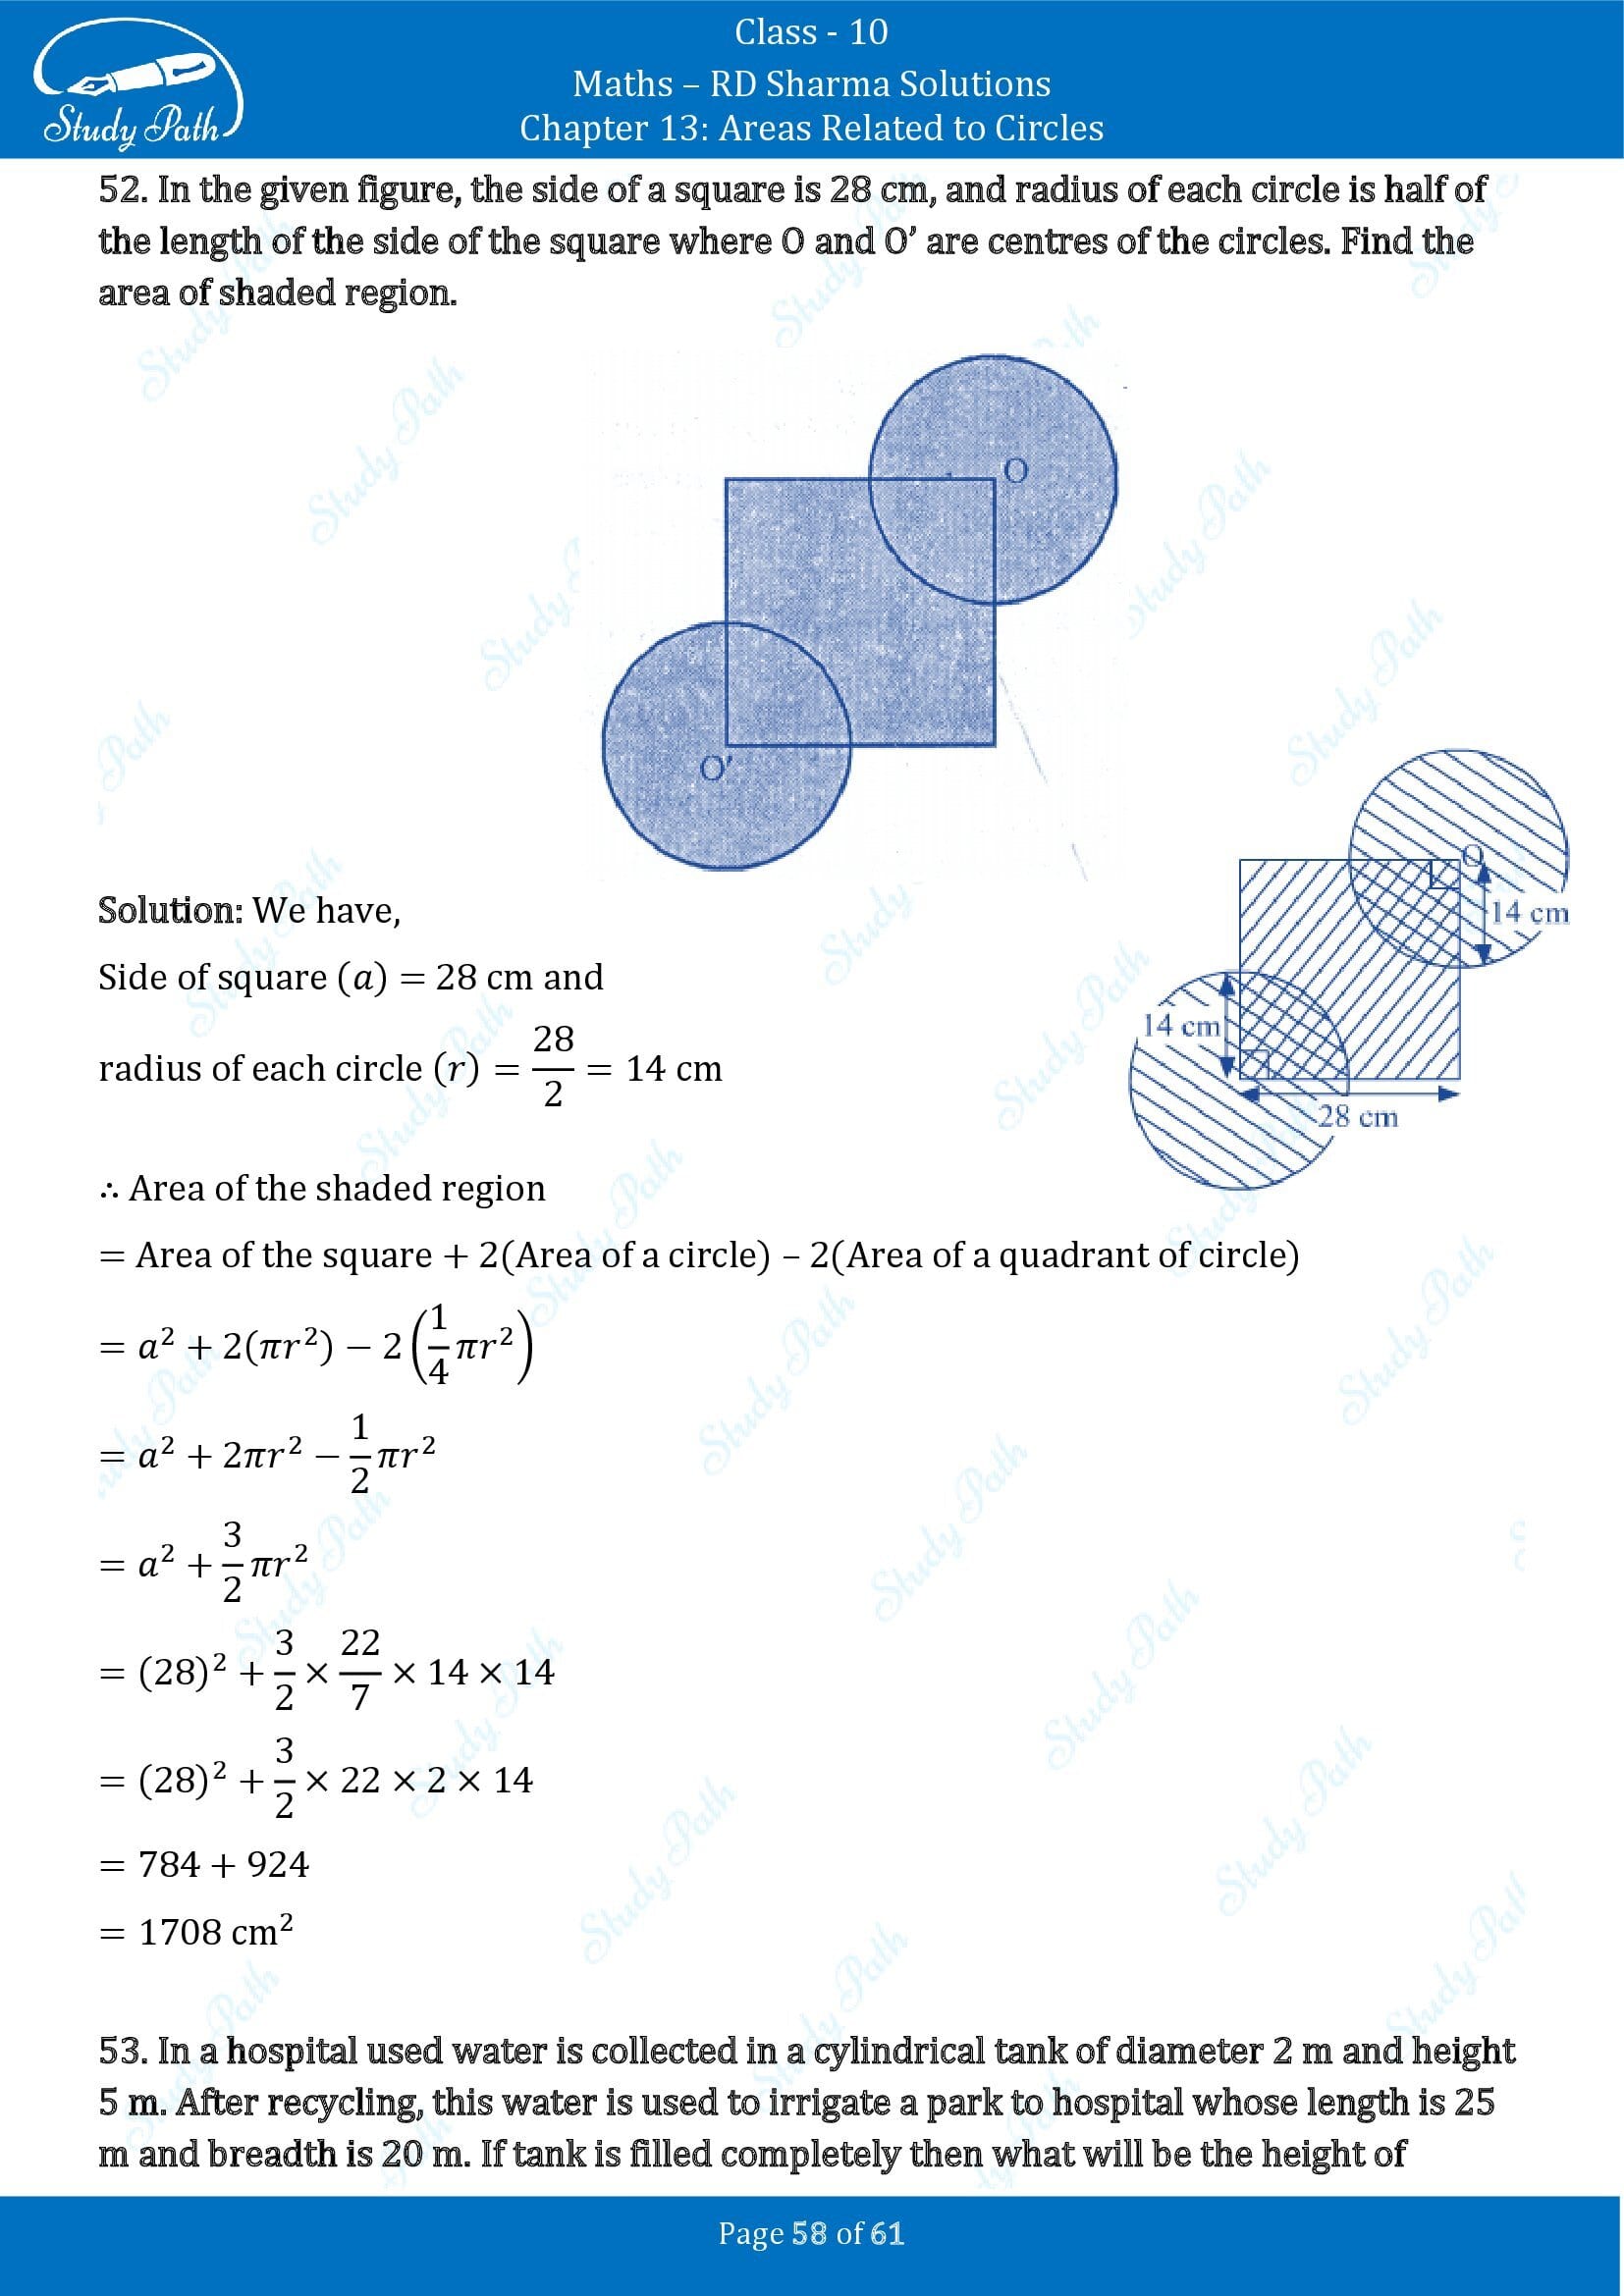 RD Sharma Solutions Class 10 Chapter 13 Areas Related to Circles Exercise 13.4 00058